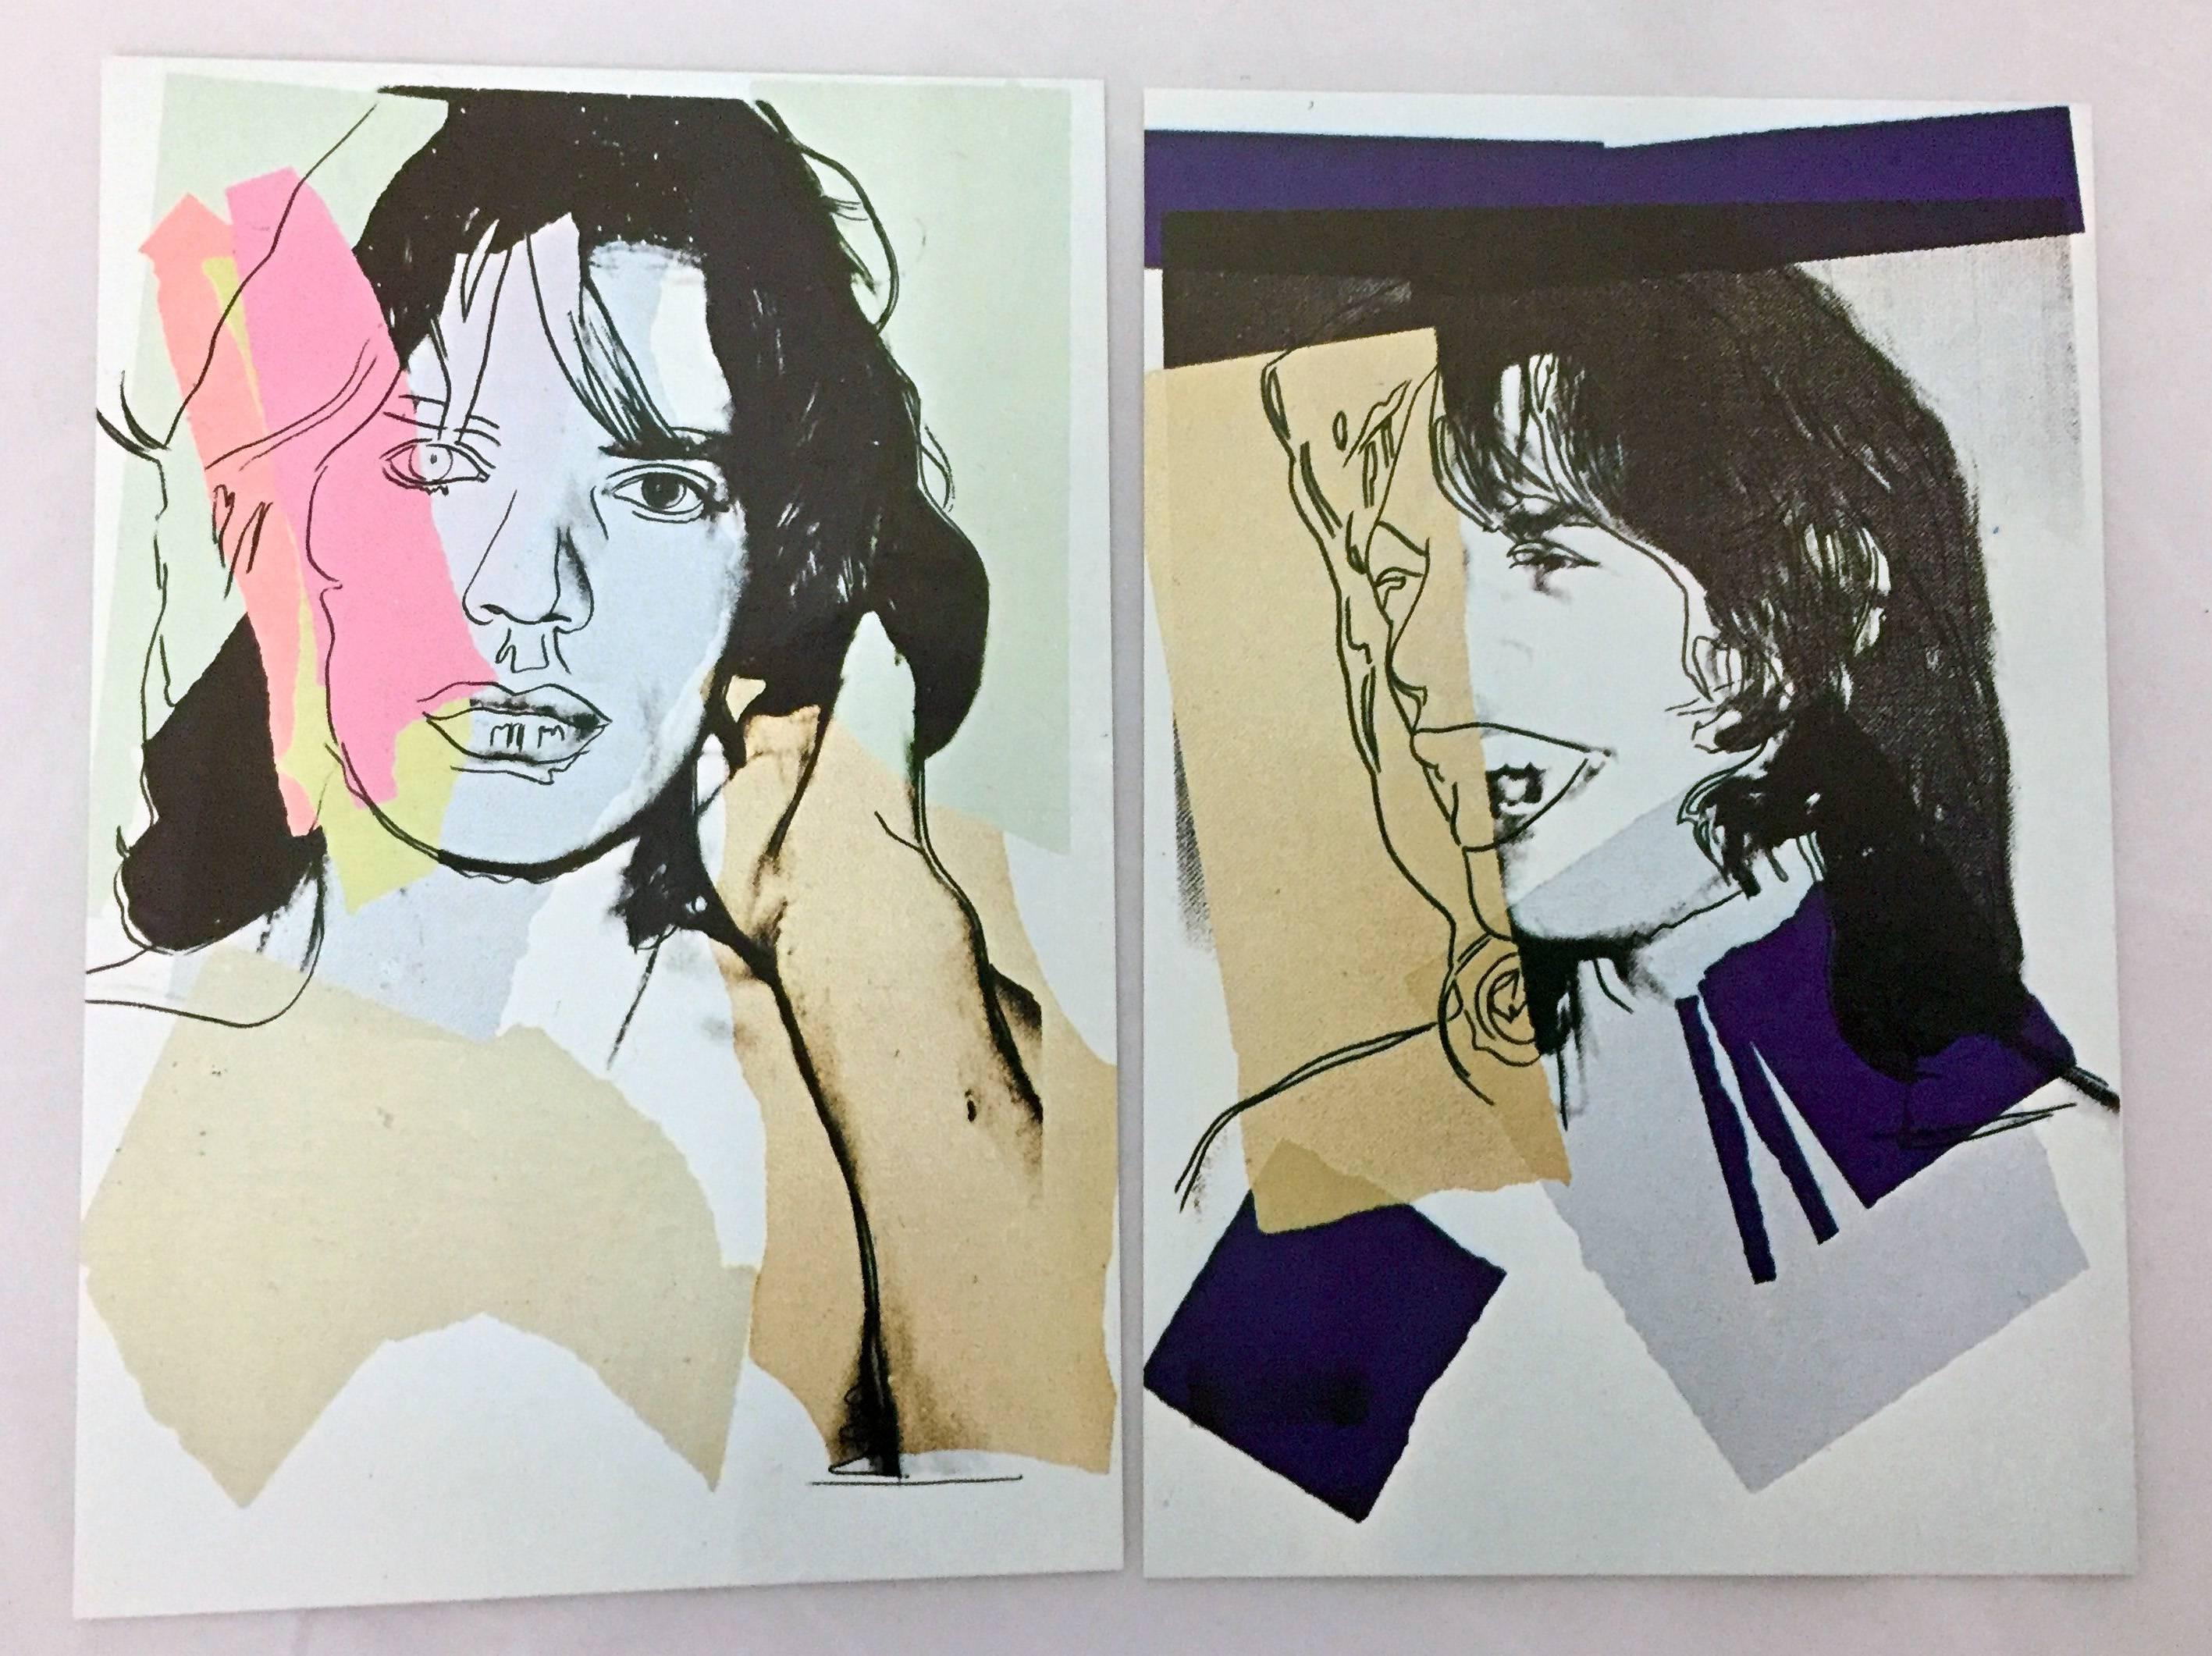 Andy Warhol, Mick Jagger, Leo Castelli 1975:
A stunning set of ten announcement cards published by Castelli Graphics in 1975 to advertise the forthcoming portfolio of ten silkscreen prints by Andy Warhol of Mick Jagger, 1975. The very first